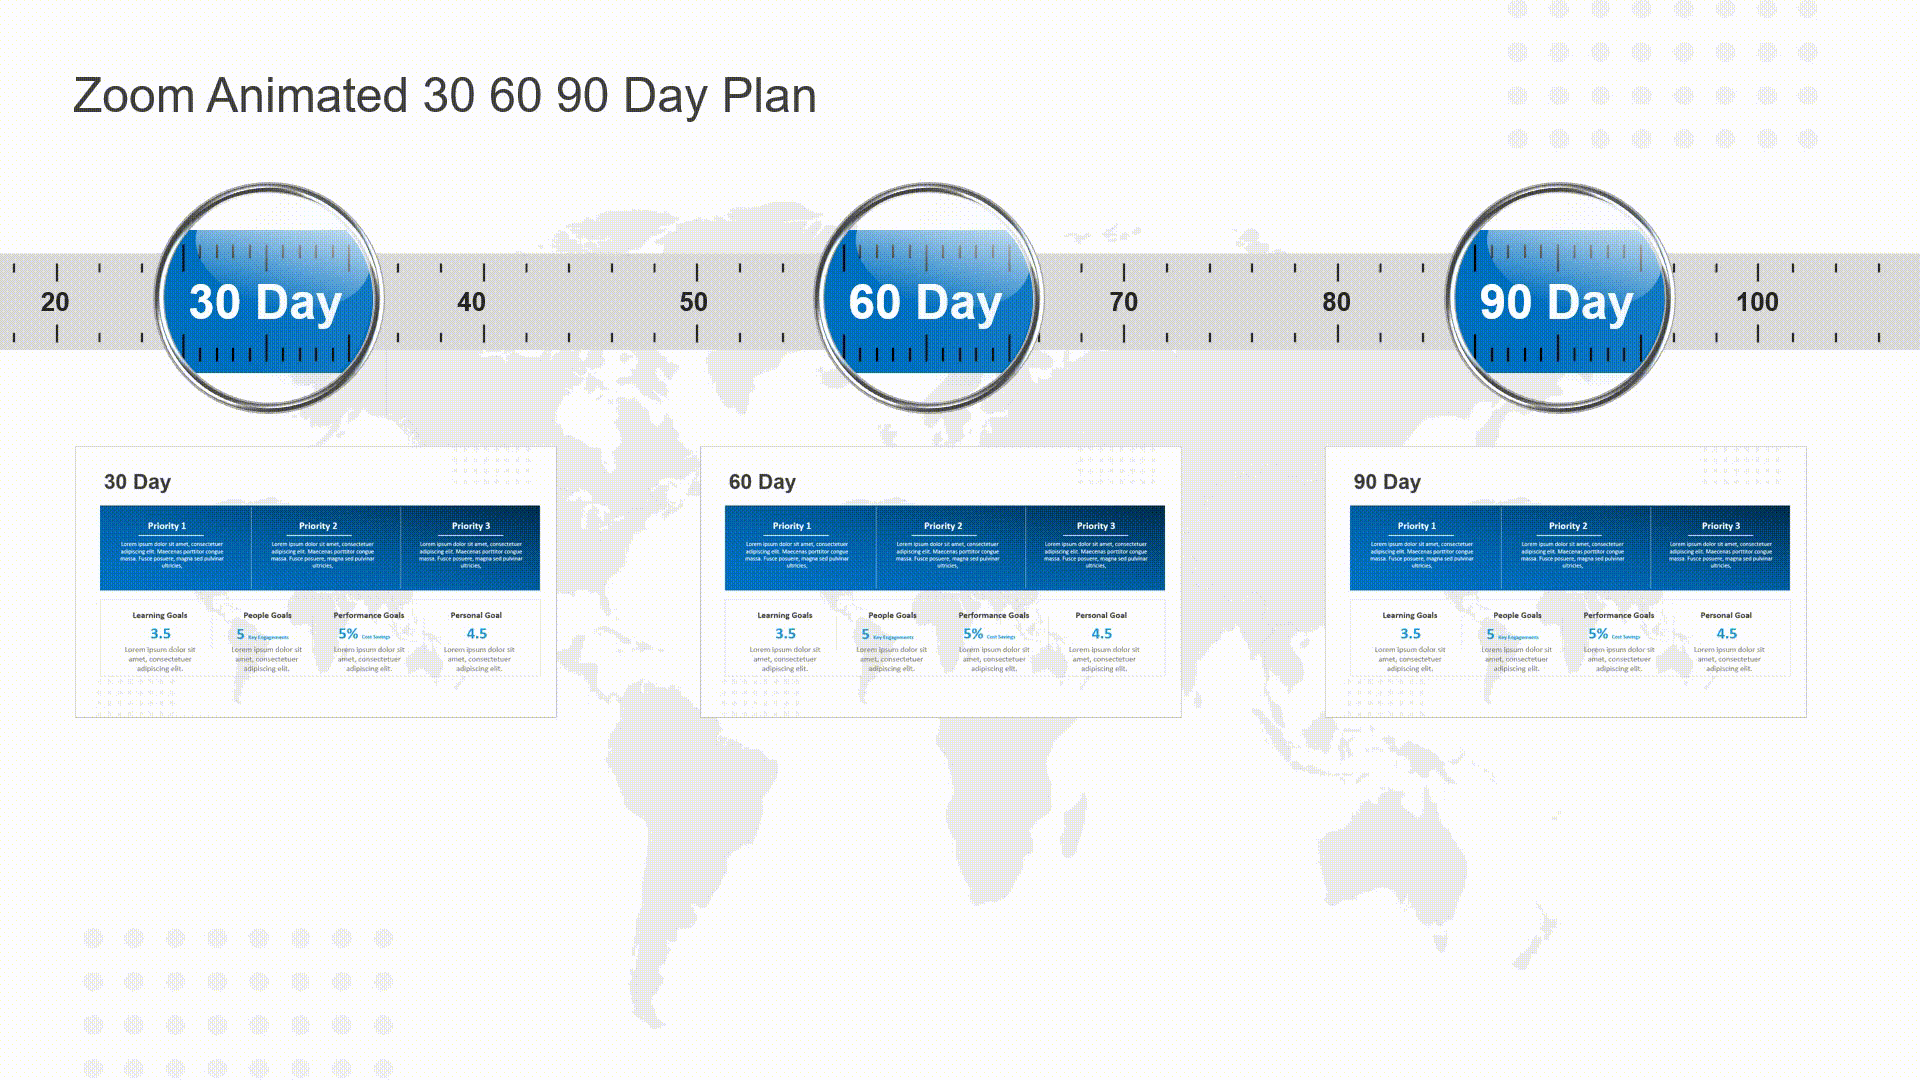 Zoom Animation 30 60 90 Day Plan